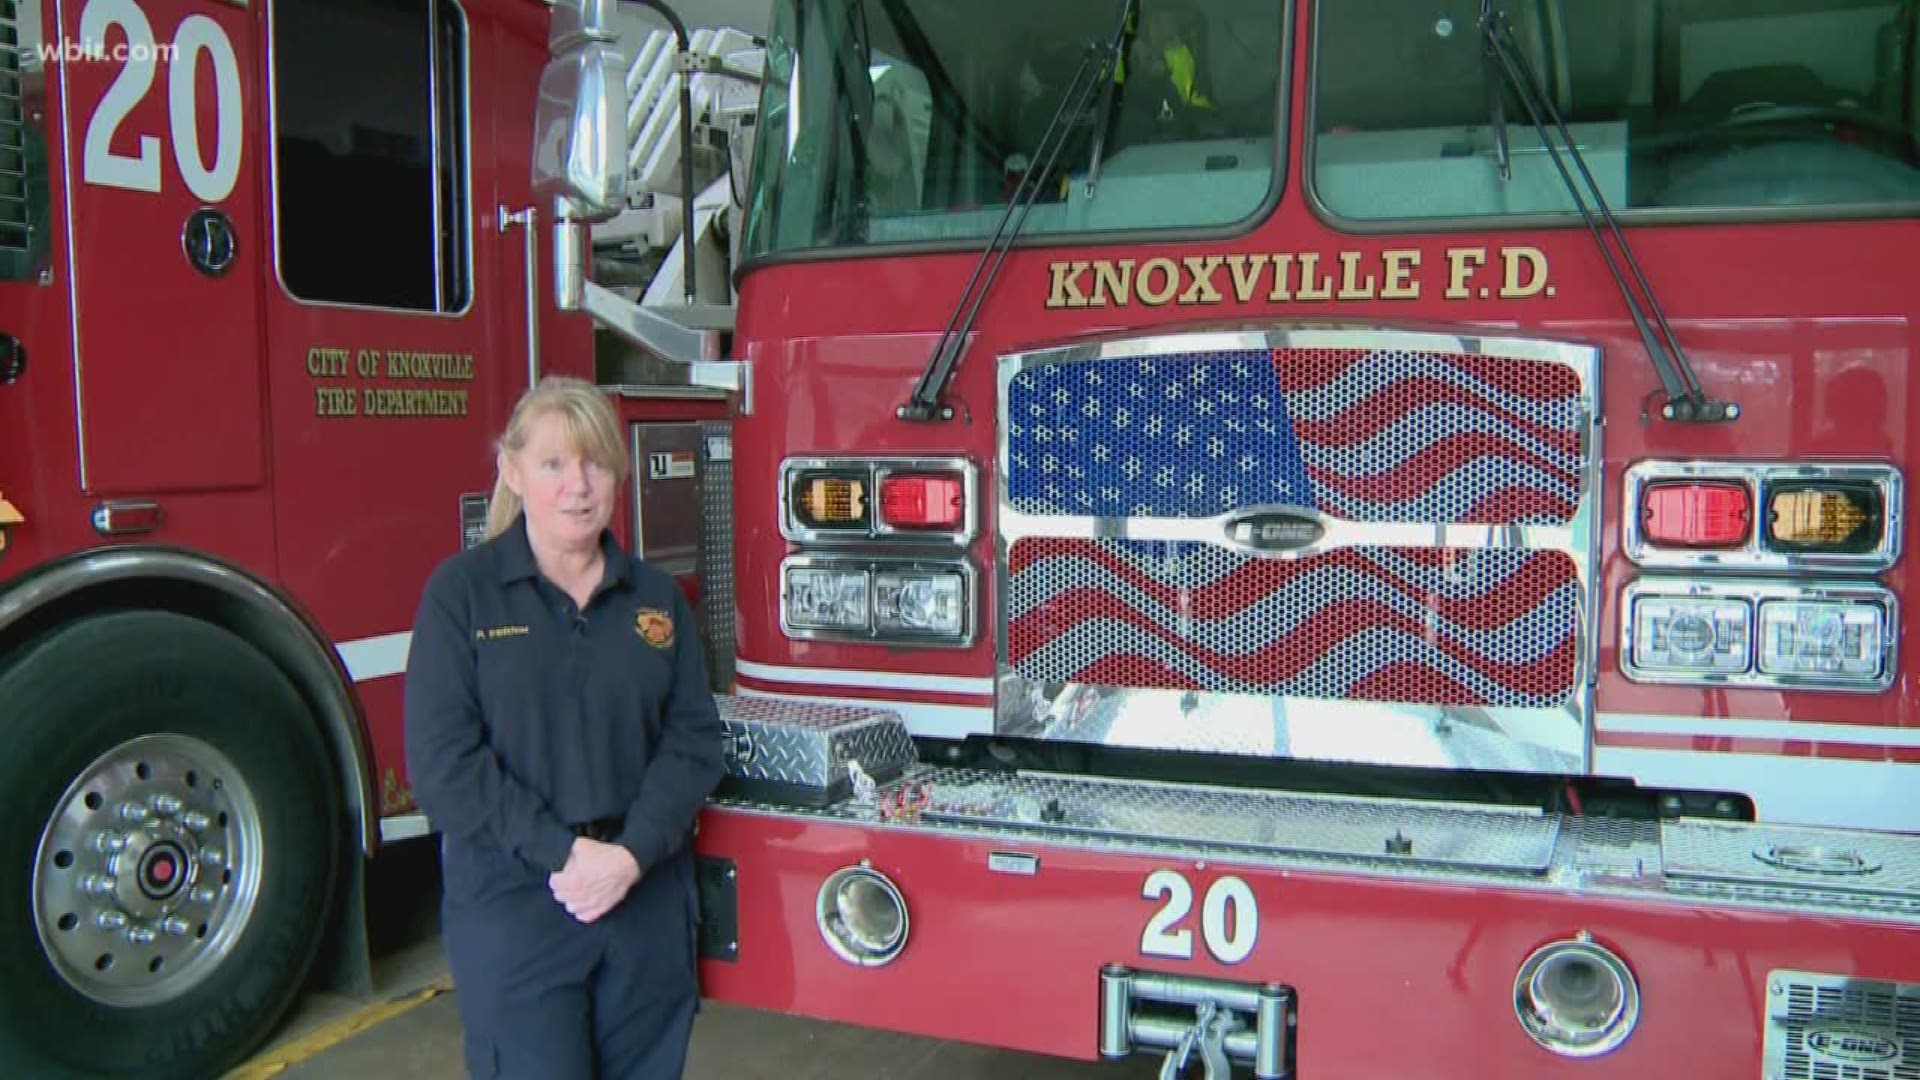 The Knoxville Fire Department could make history in 2020 by electing its first ever female assistant chief.